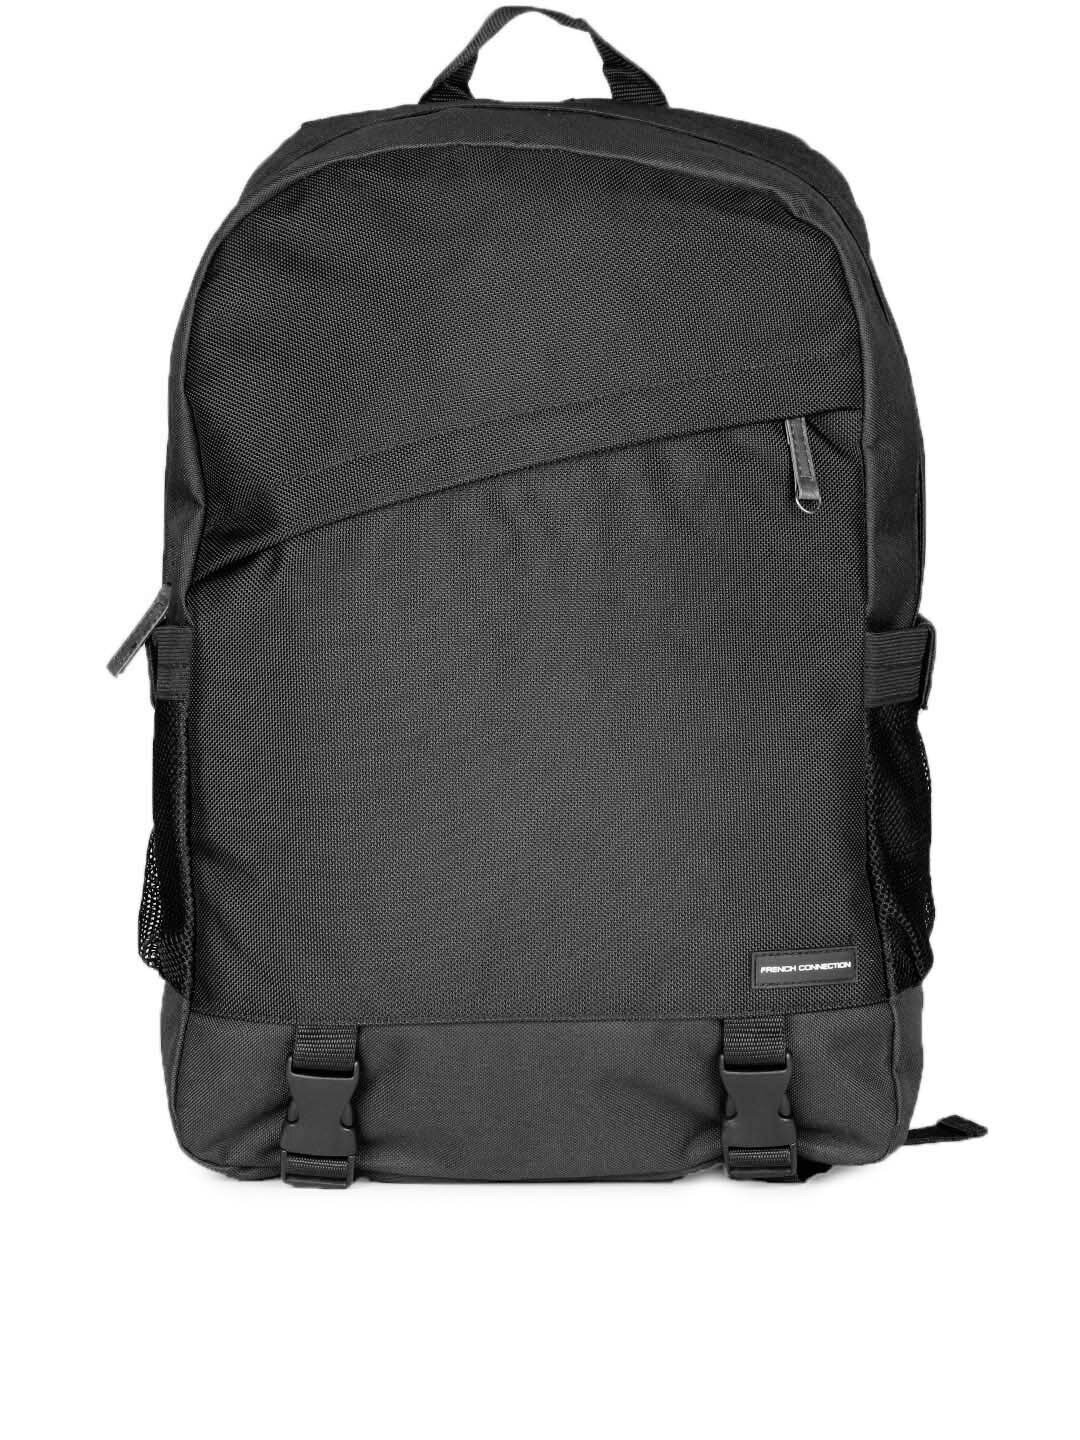 French Connection Unisex Black Backpack